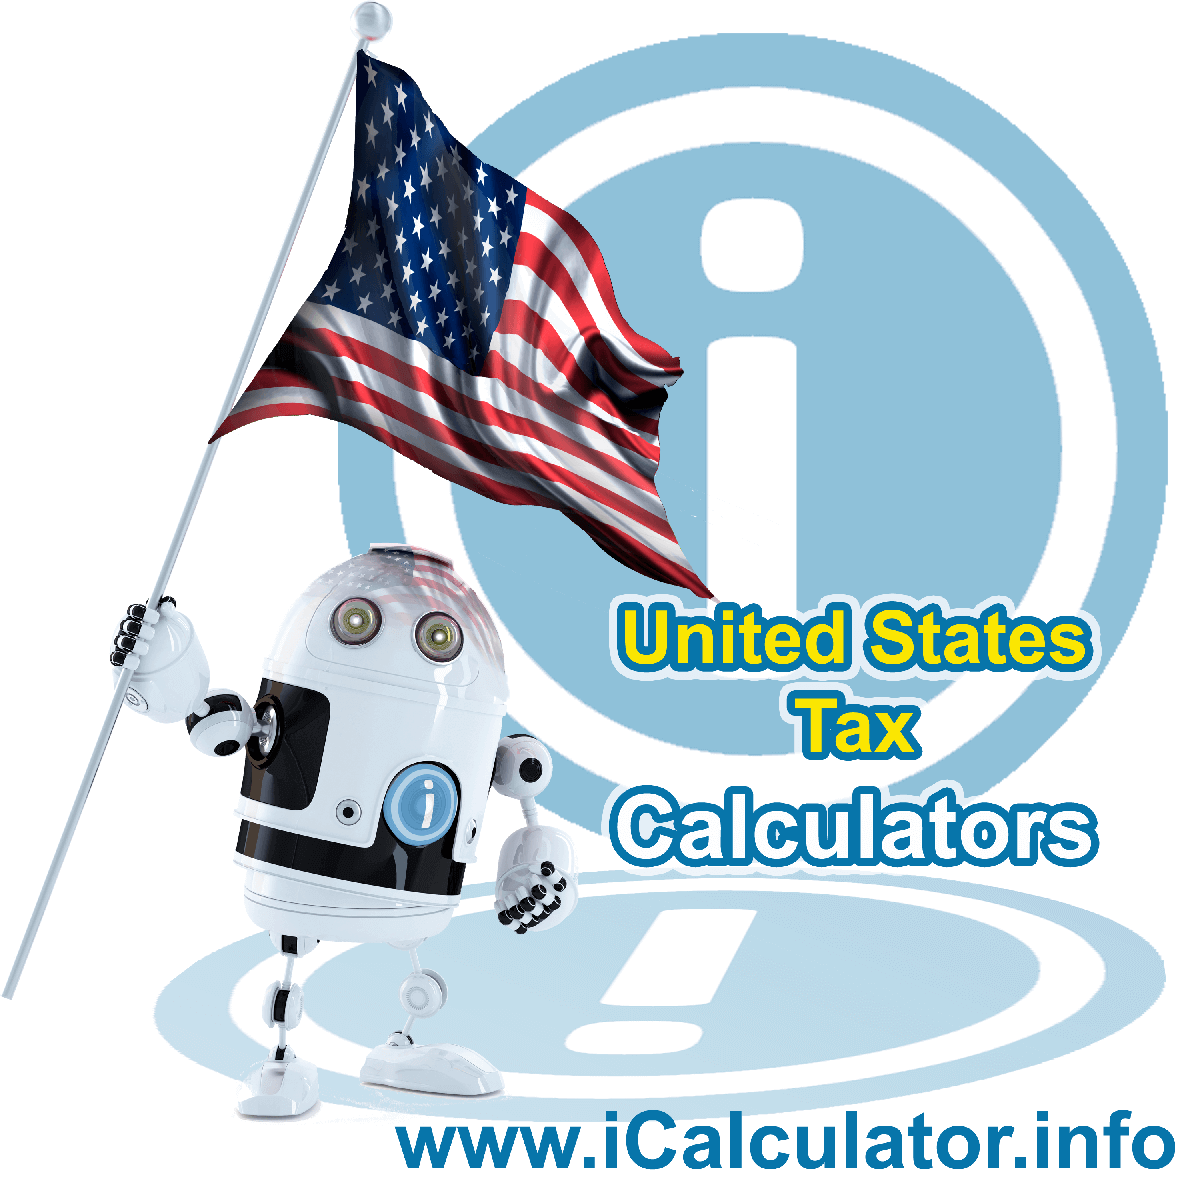 US Tax Calculator Calculator. This image shows the uUnited States flag and information relating to the tax formula for calculating your tax return in the united states in 2023 using the US Tax Calculator